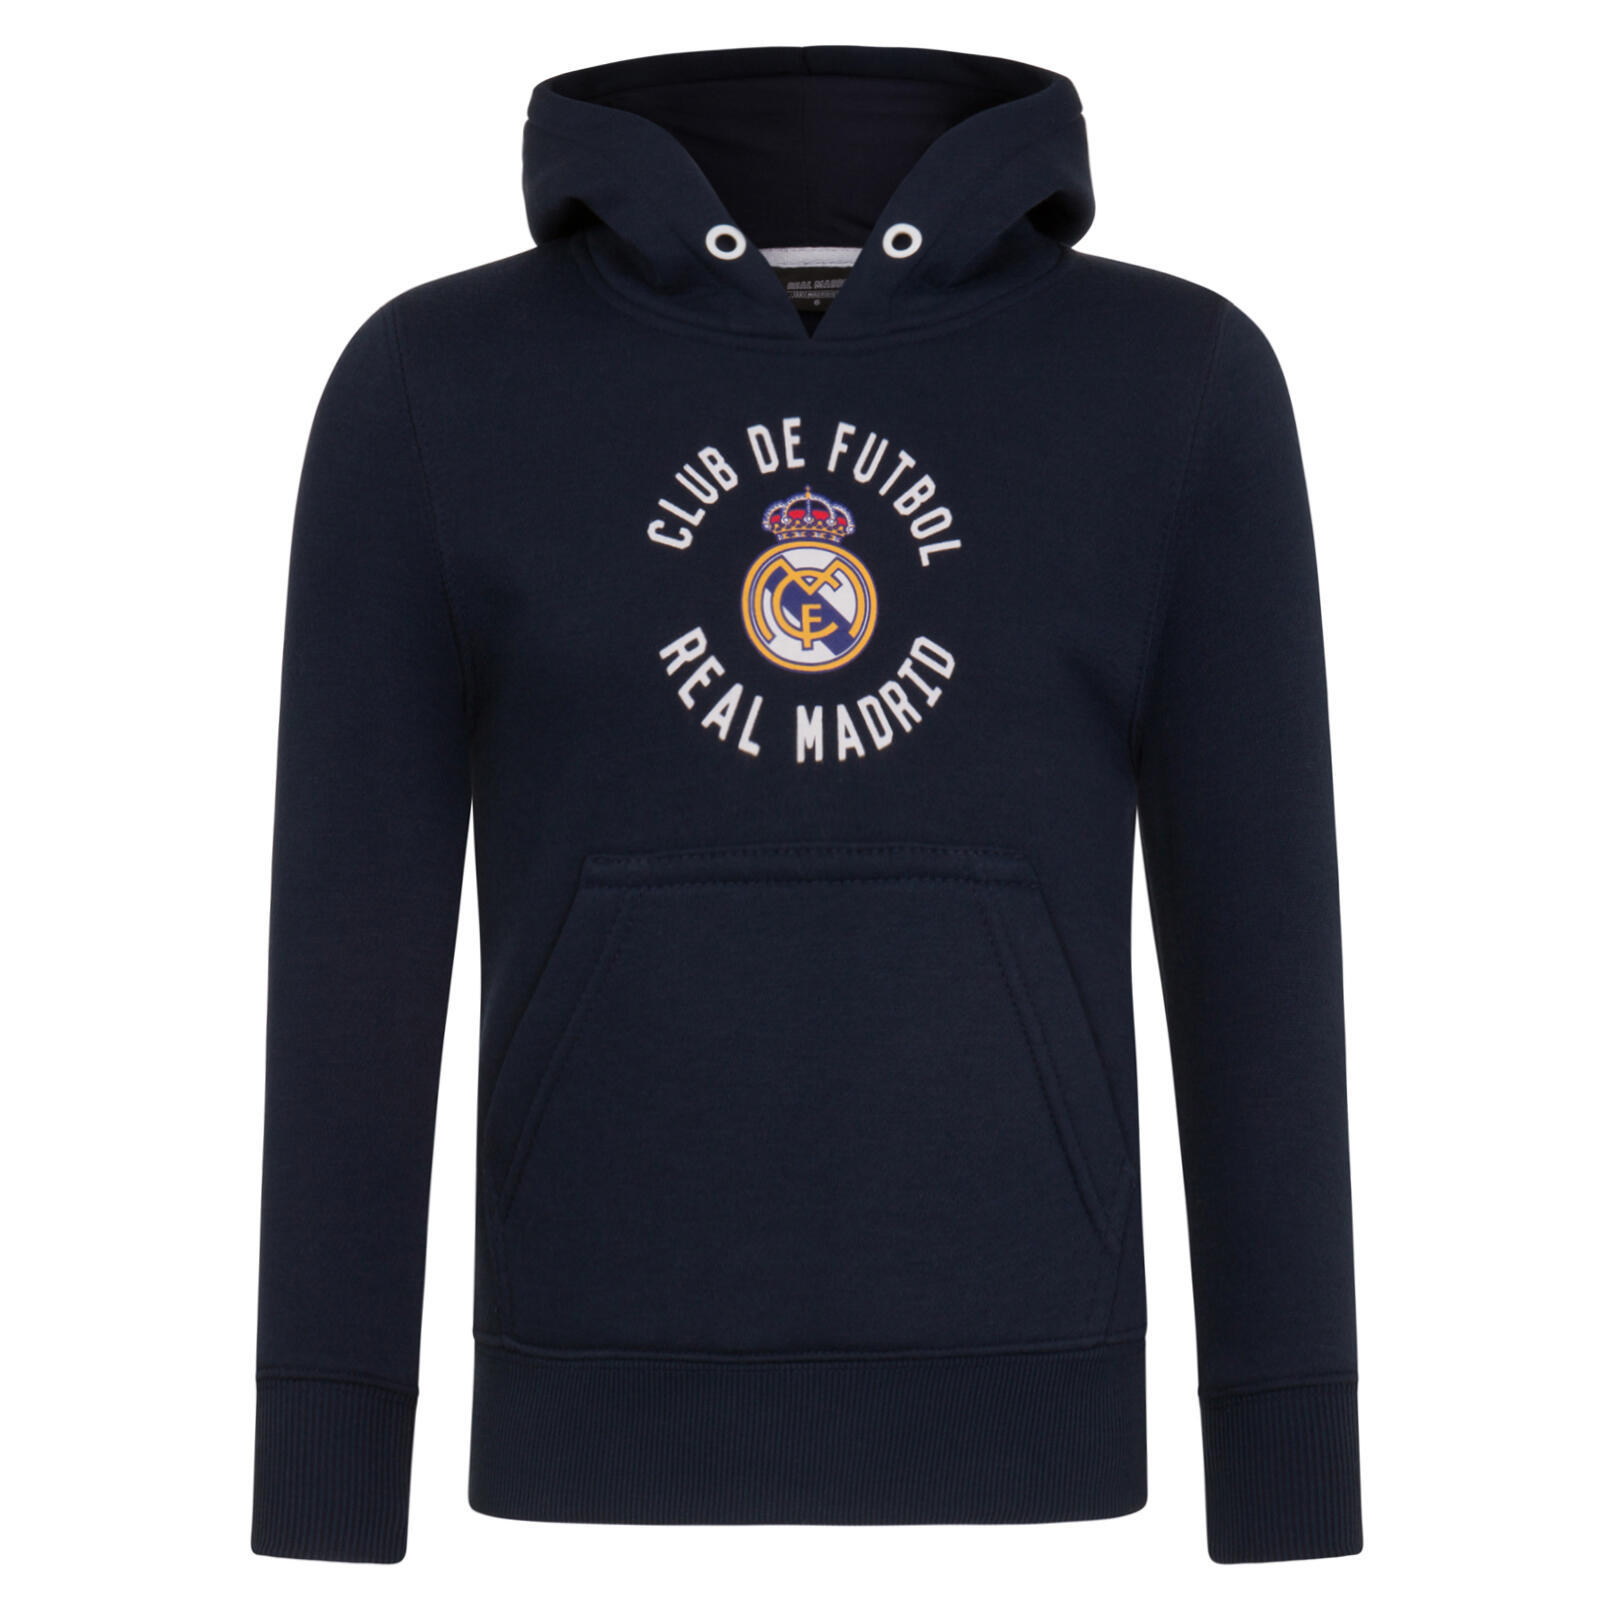 REAL MADRID Real Madrid Boys Hoody Fleece Graphic Kids OFFICIAL Football Gift